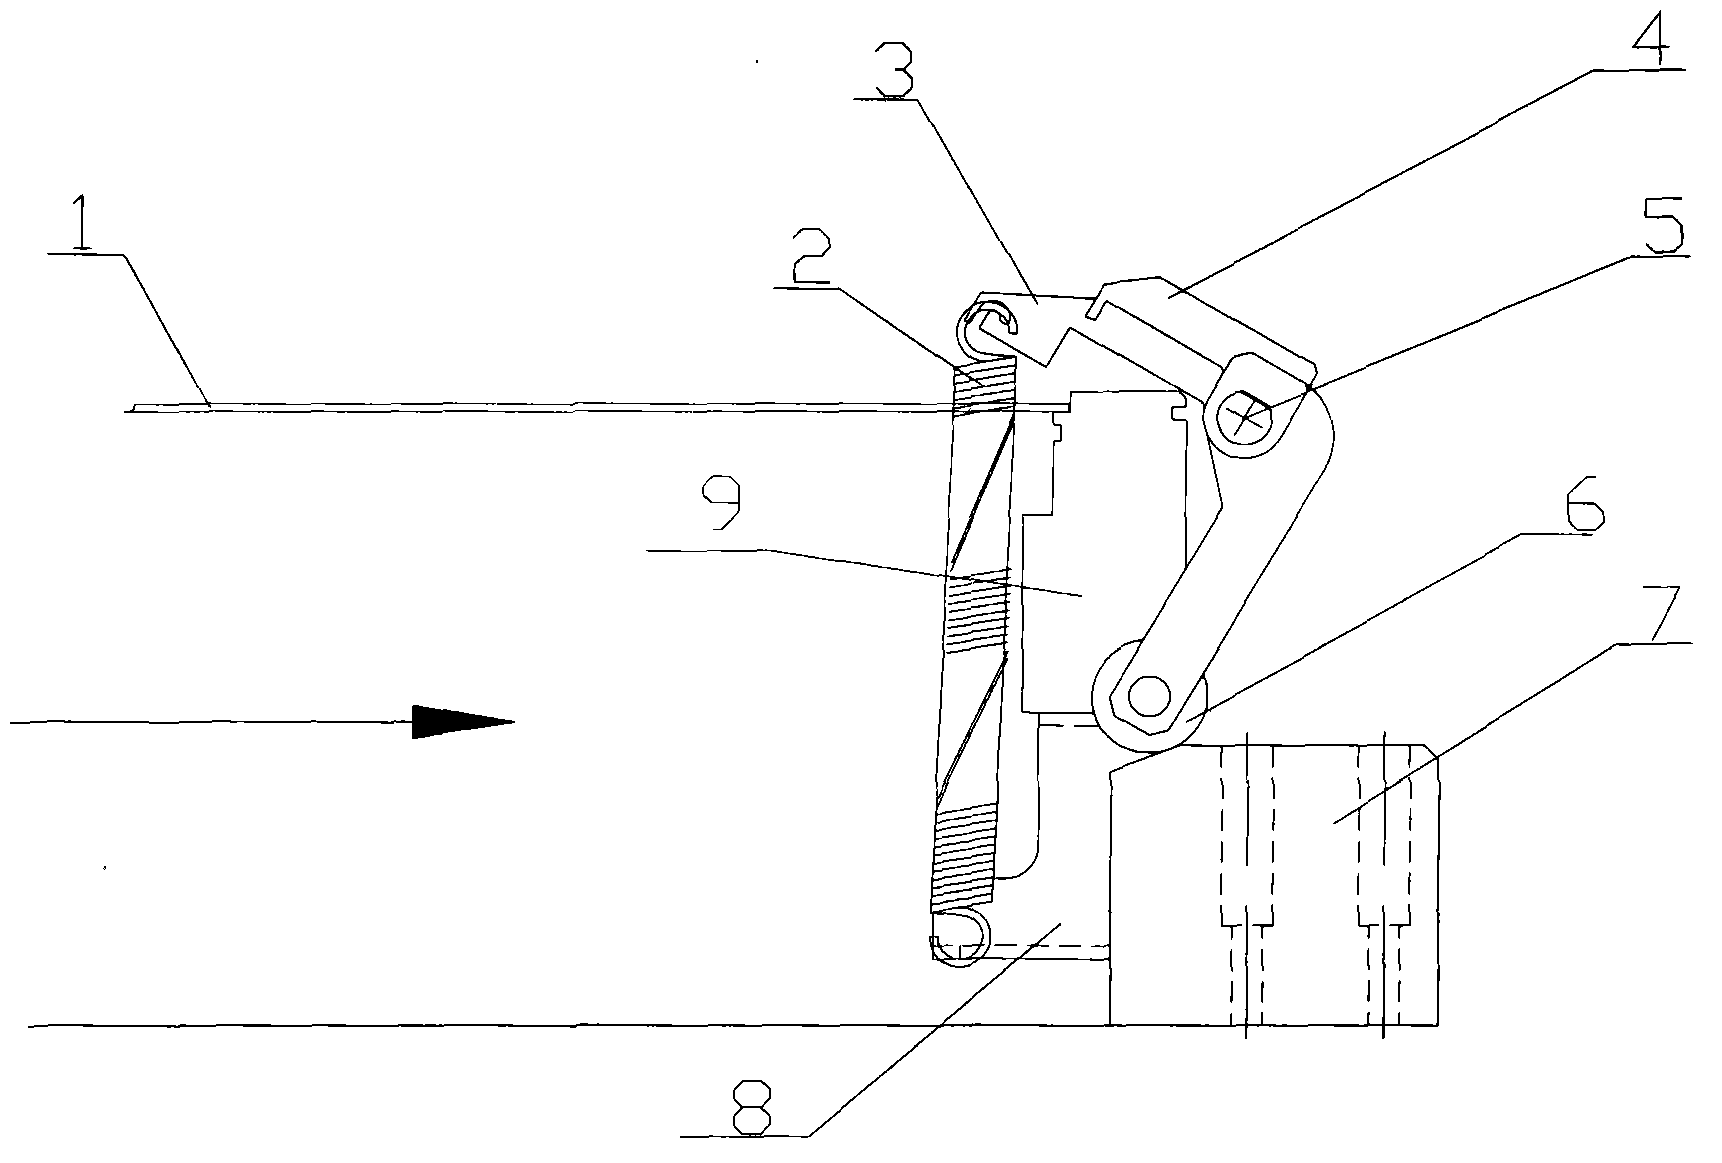 Compressing device of optical inspection instrument